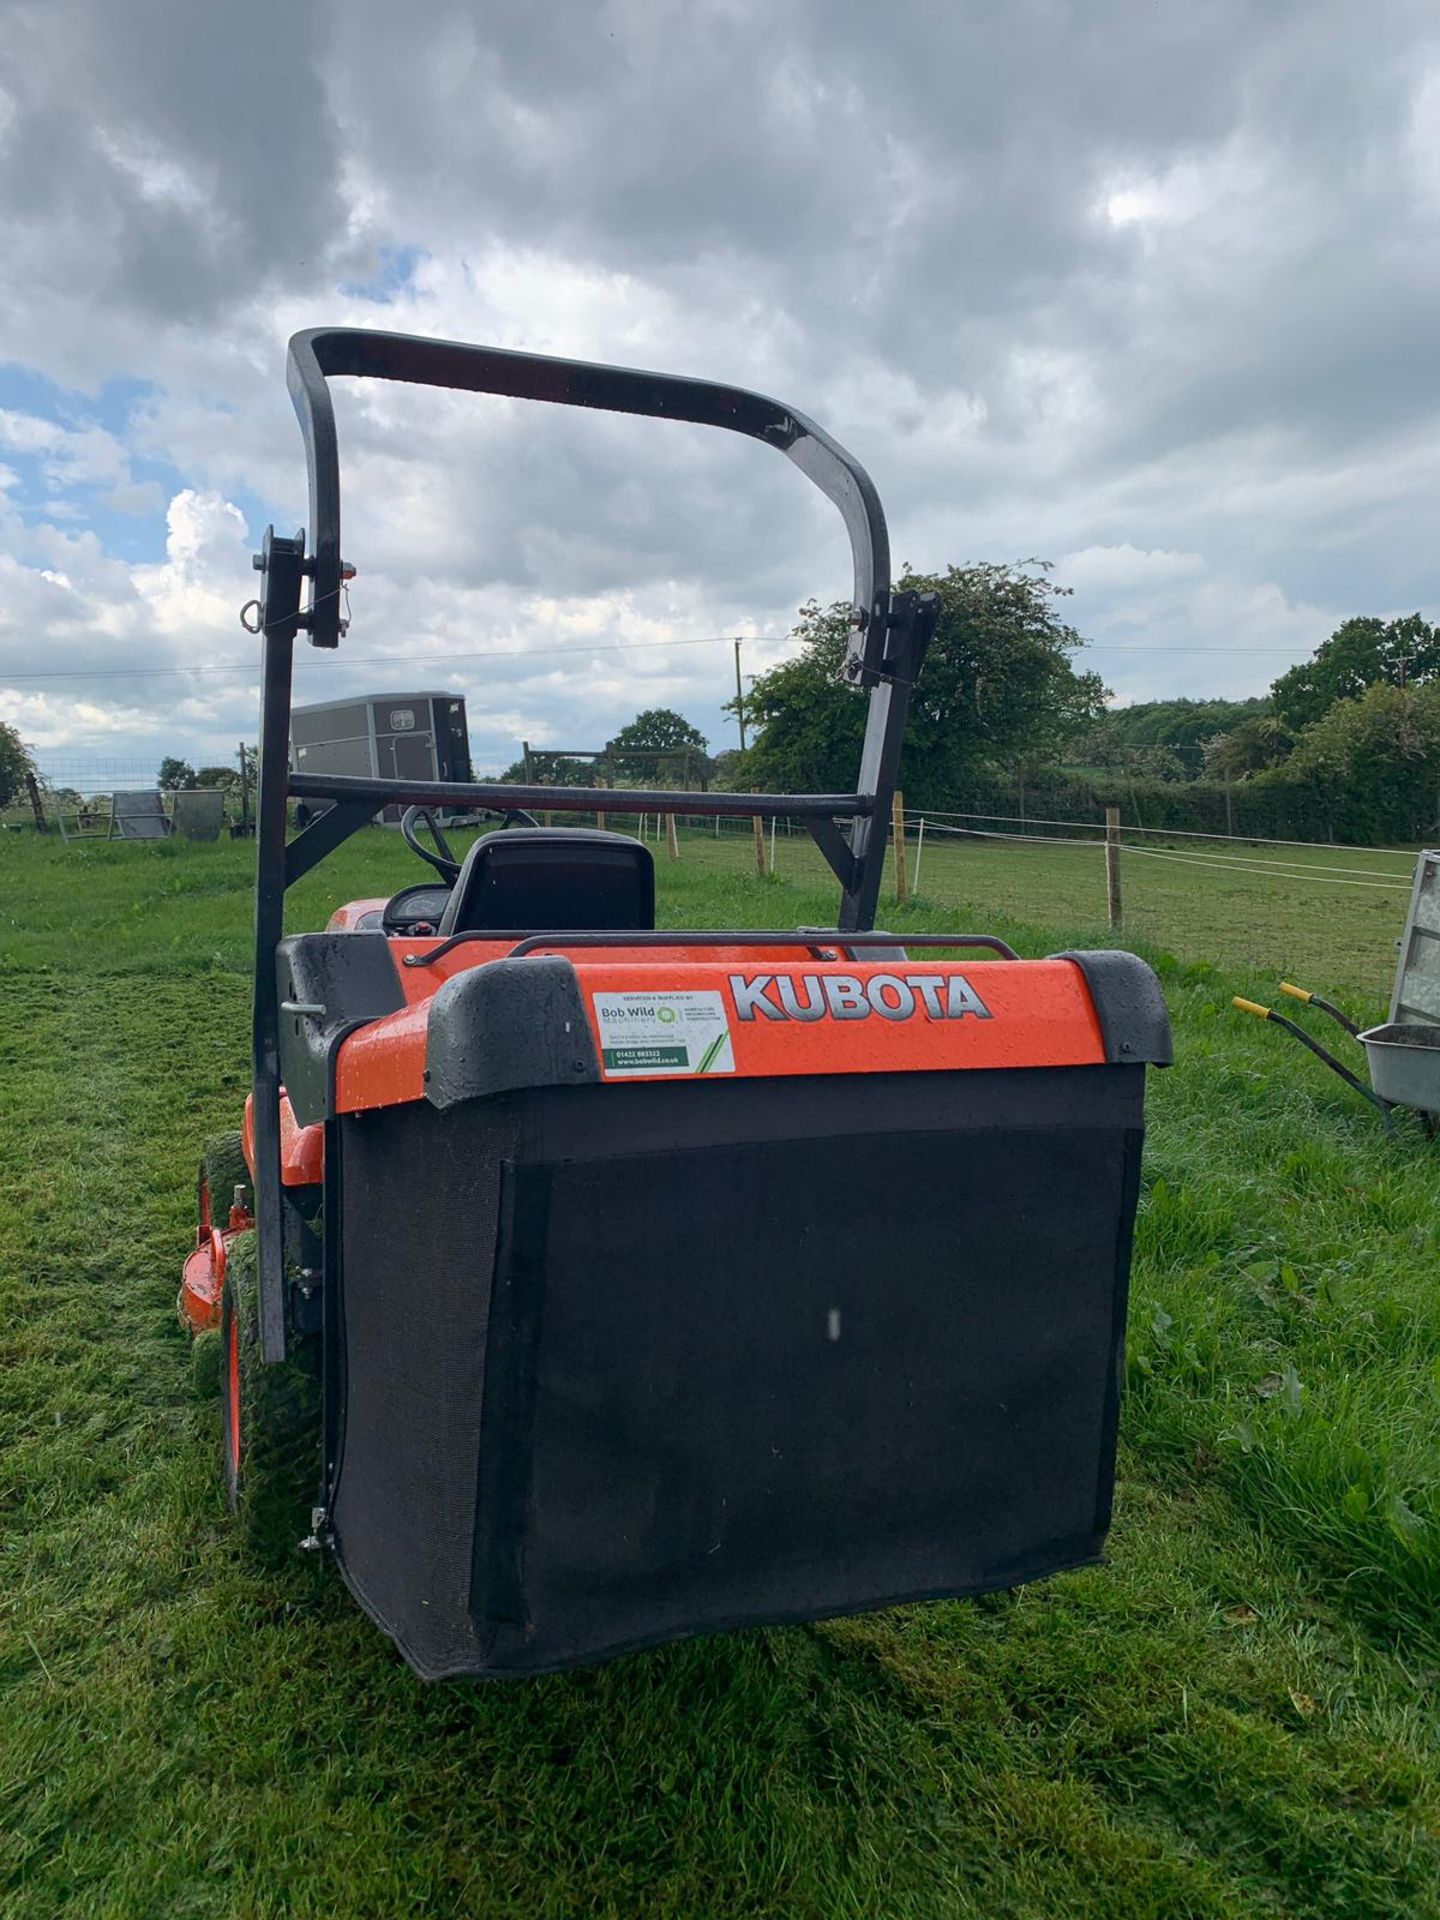 2015 KUBOTA G23-II TWIN CUT LAWN MOWER WITH ROLL BAR, HYDRAULIC TIP, LOW DUMP COLLECTOR - 28 HOURS!! - Image 6 of 15